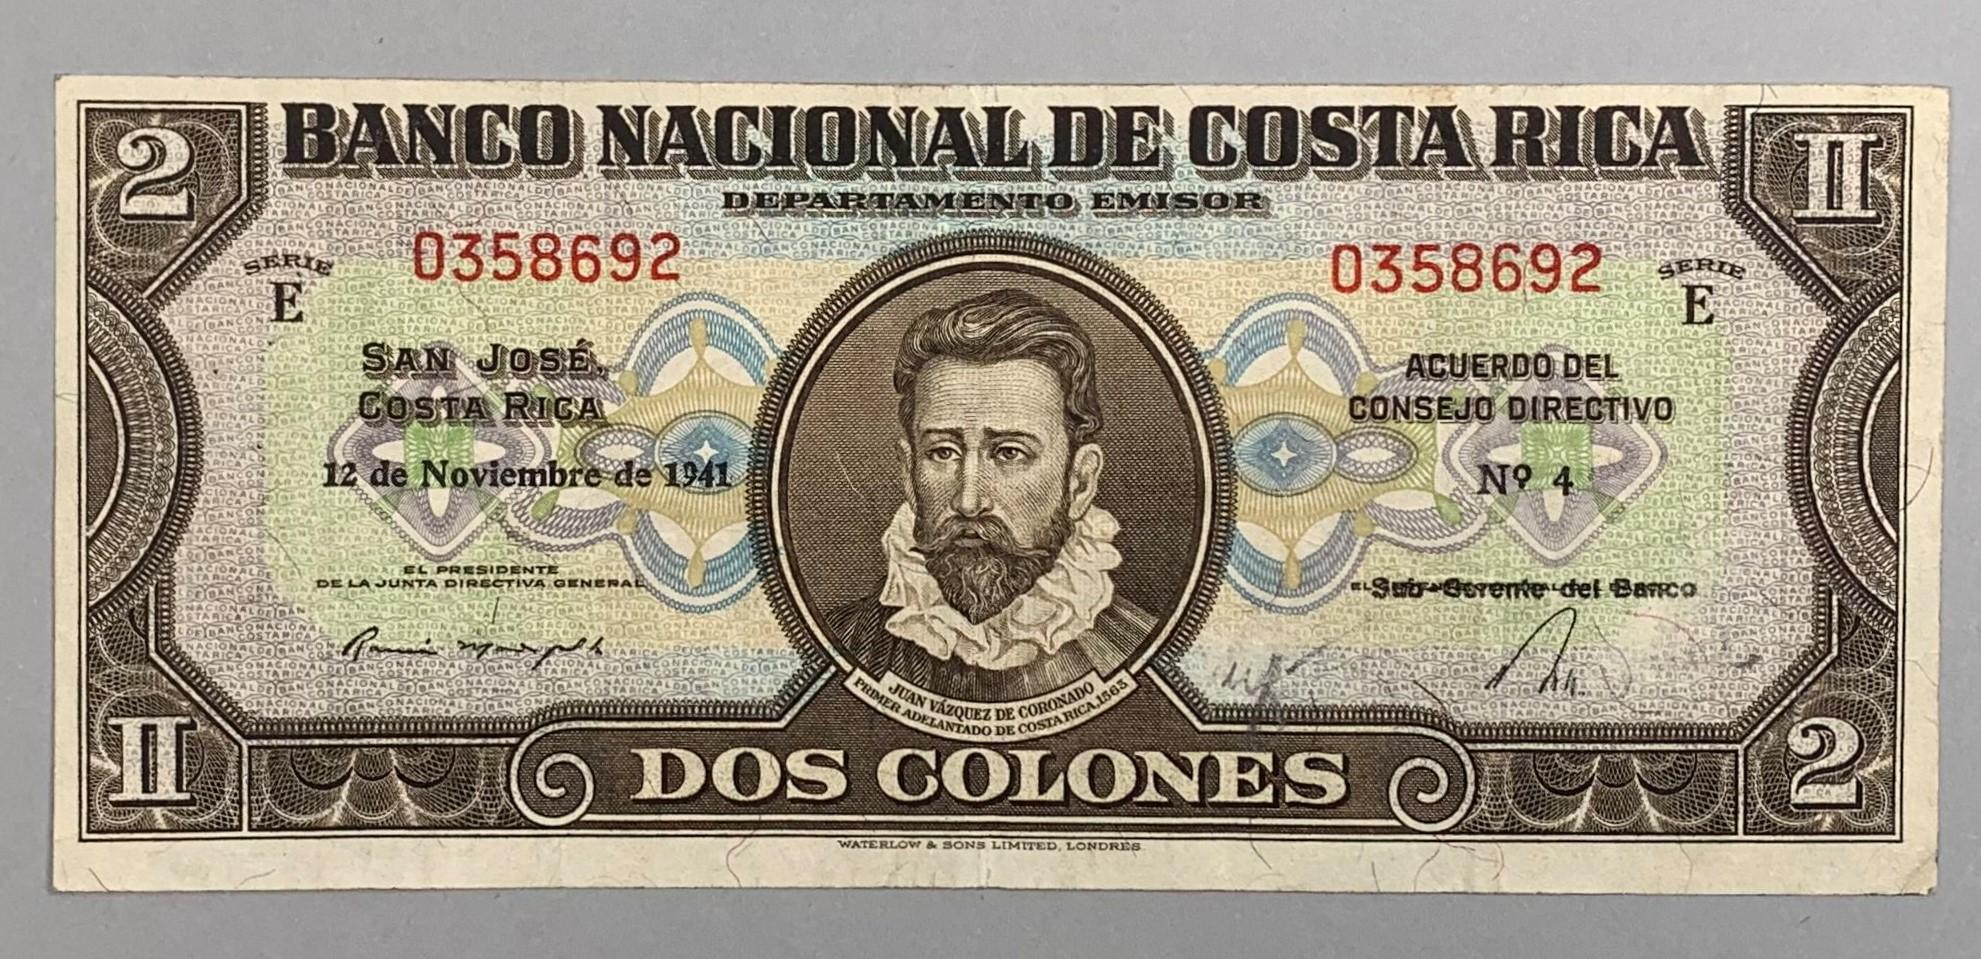 The front of the bill is mainly brown on a multi-colored background made up of a pattern that reads “BANCO NACIONAL DE COSTA RICA” which translates to “National Bank of Costa Rica.” The bill is titled “Banco Nacional de Costa Rica Departamento Emisor” and “Dos Colones” between which there is a three-quarter bust portrait of Juan Vázquez de Coronado that is captioned with his name and the assignation of “Primer Adelantado de Costa Rica, 1565.” 